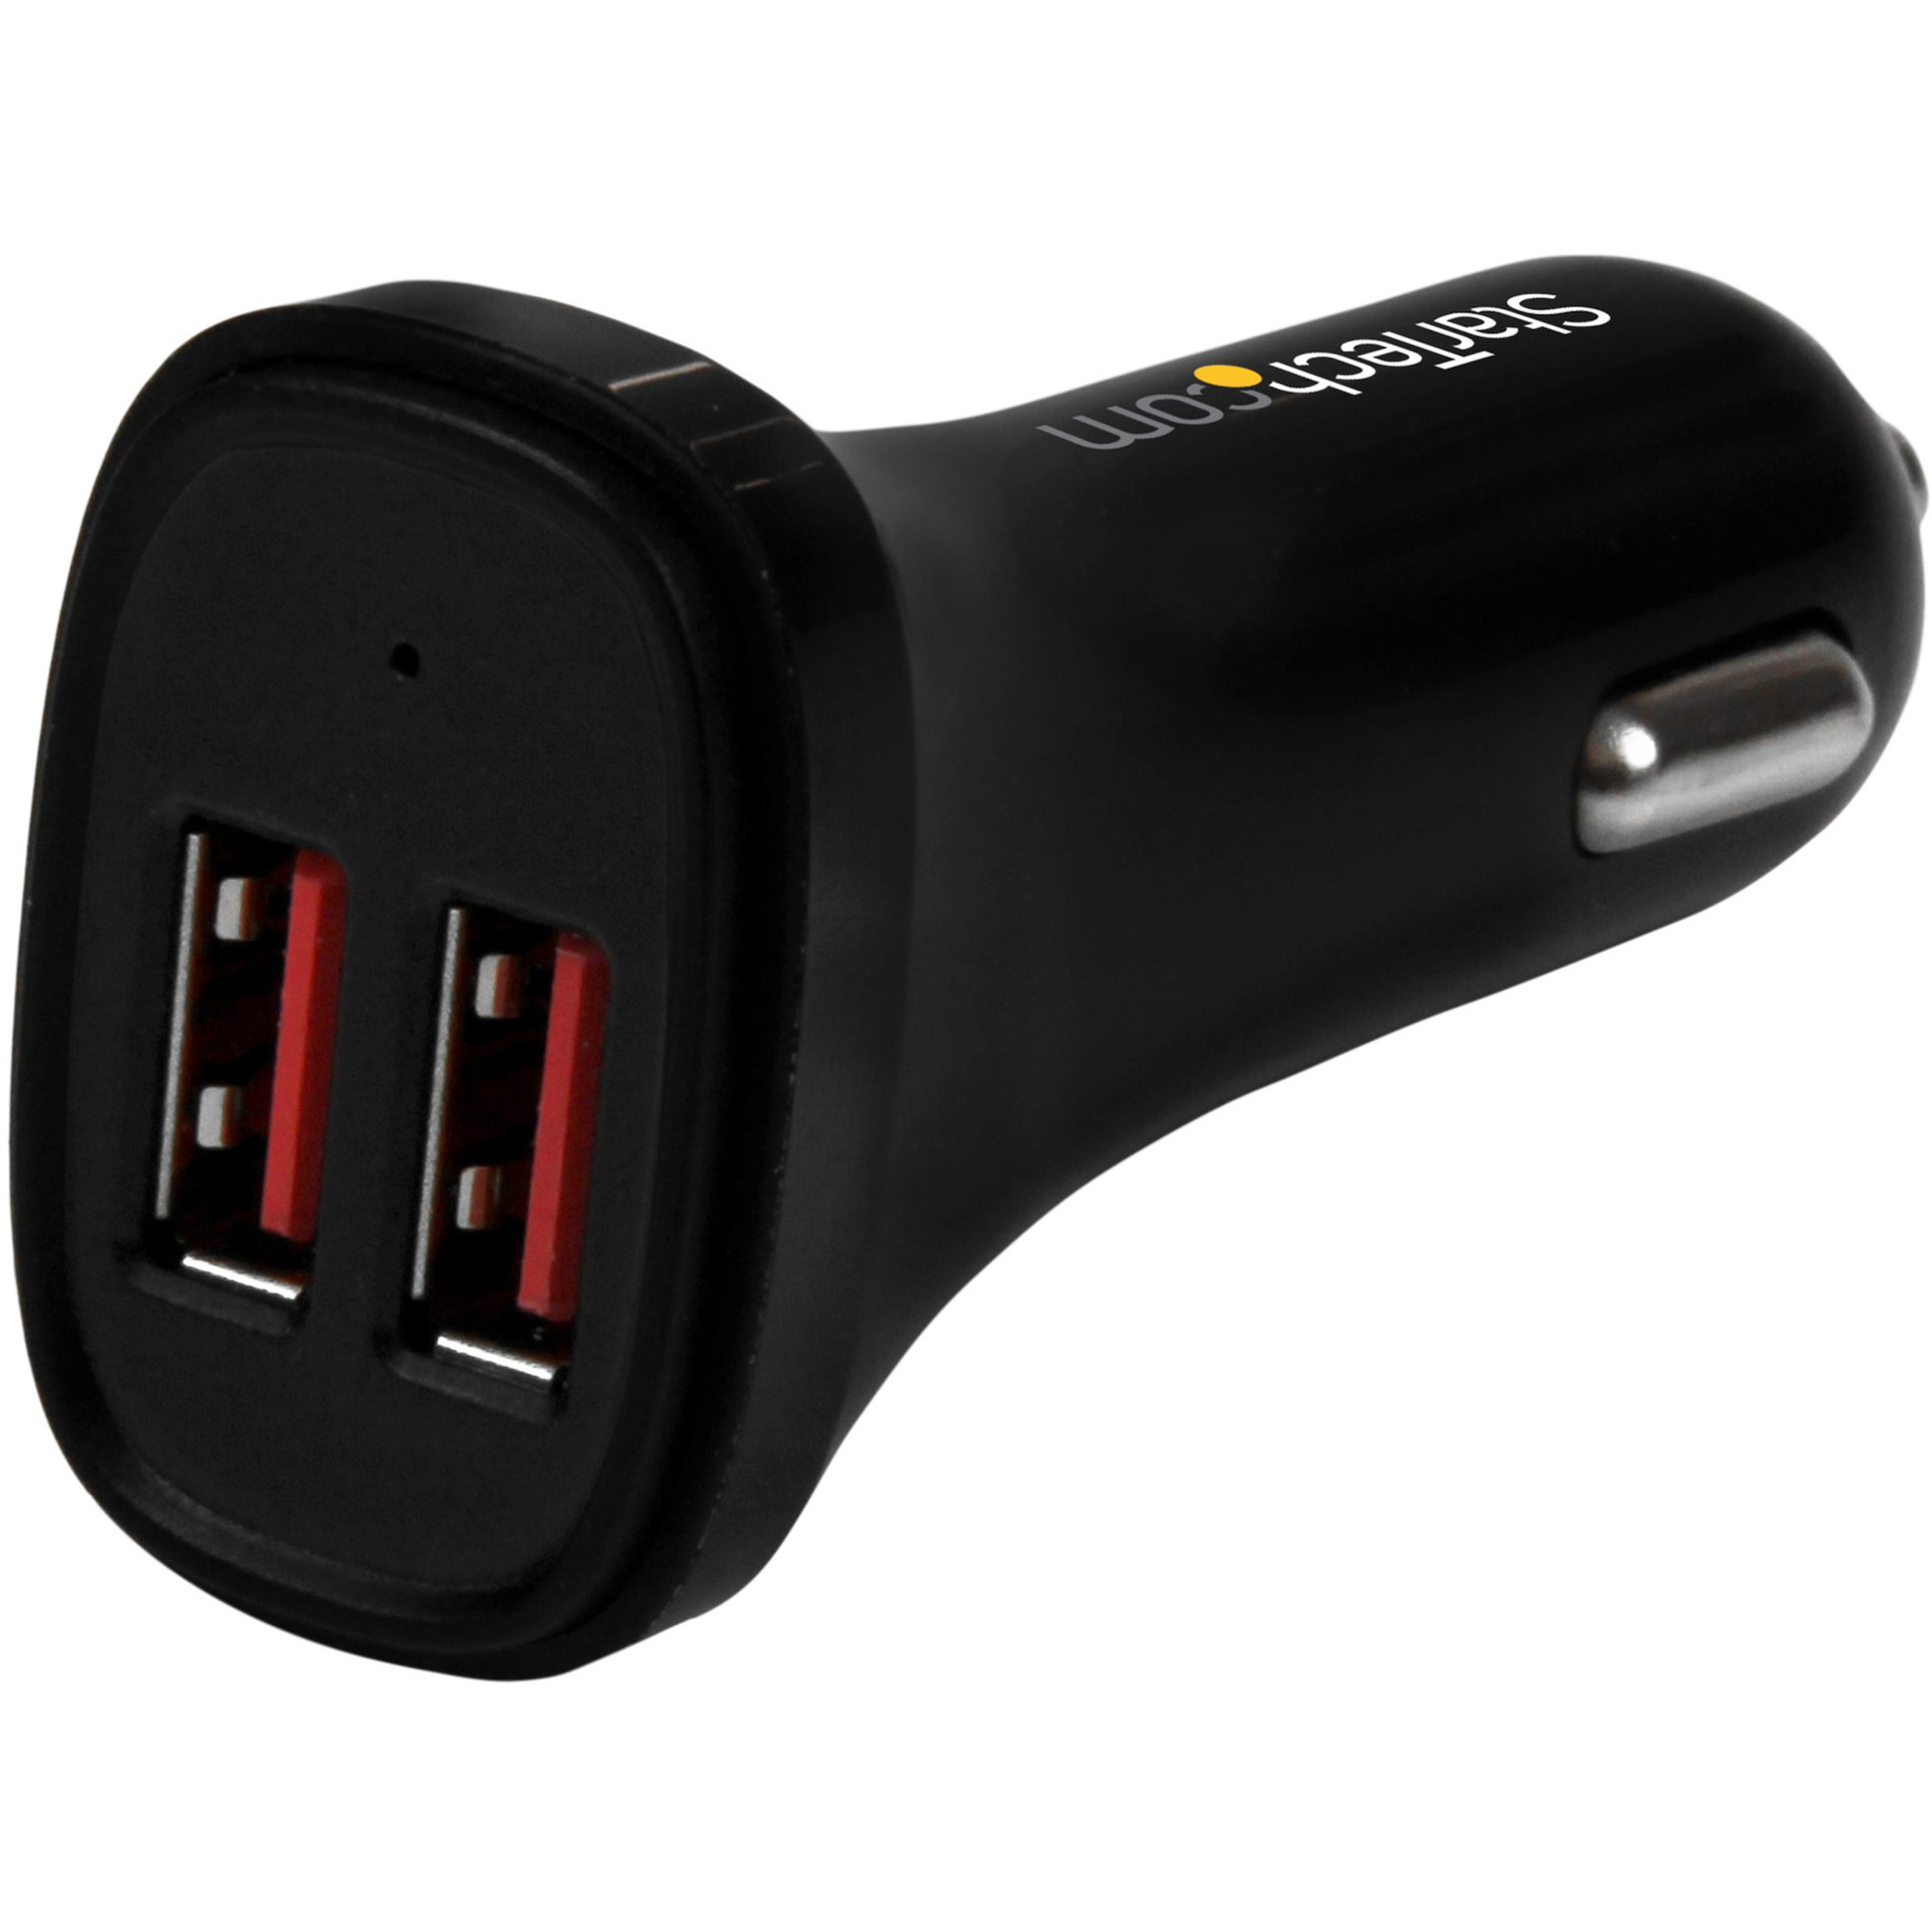 Startech .com Dual Port USB Car ChargerBlackHigh Power 24W/4.8A2 port USB Car ChargerCharge two tablets at onceCharge two tabl… USB2PCARBKS